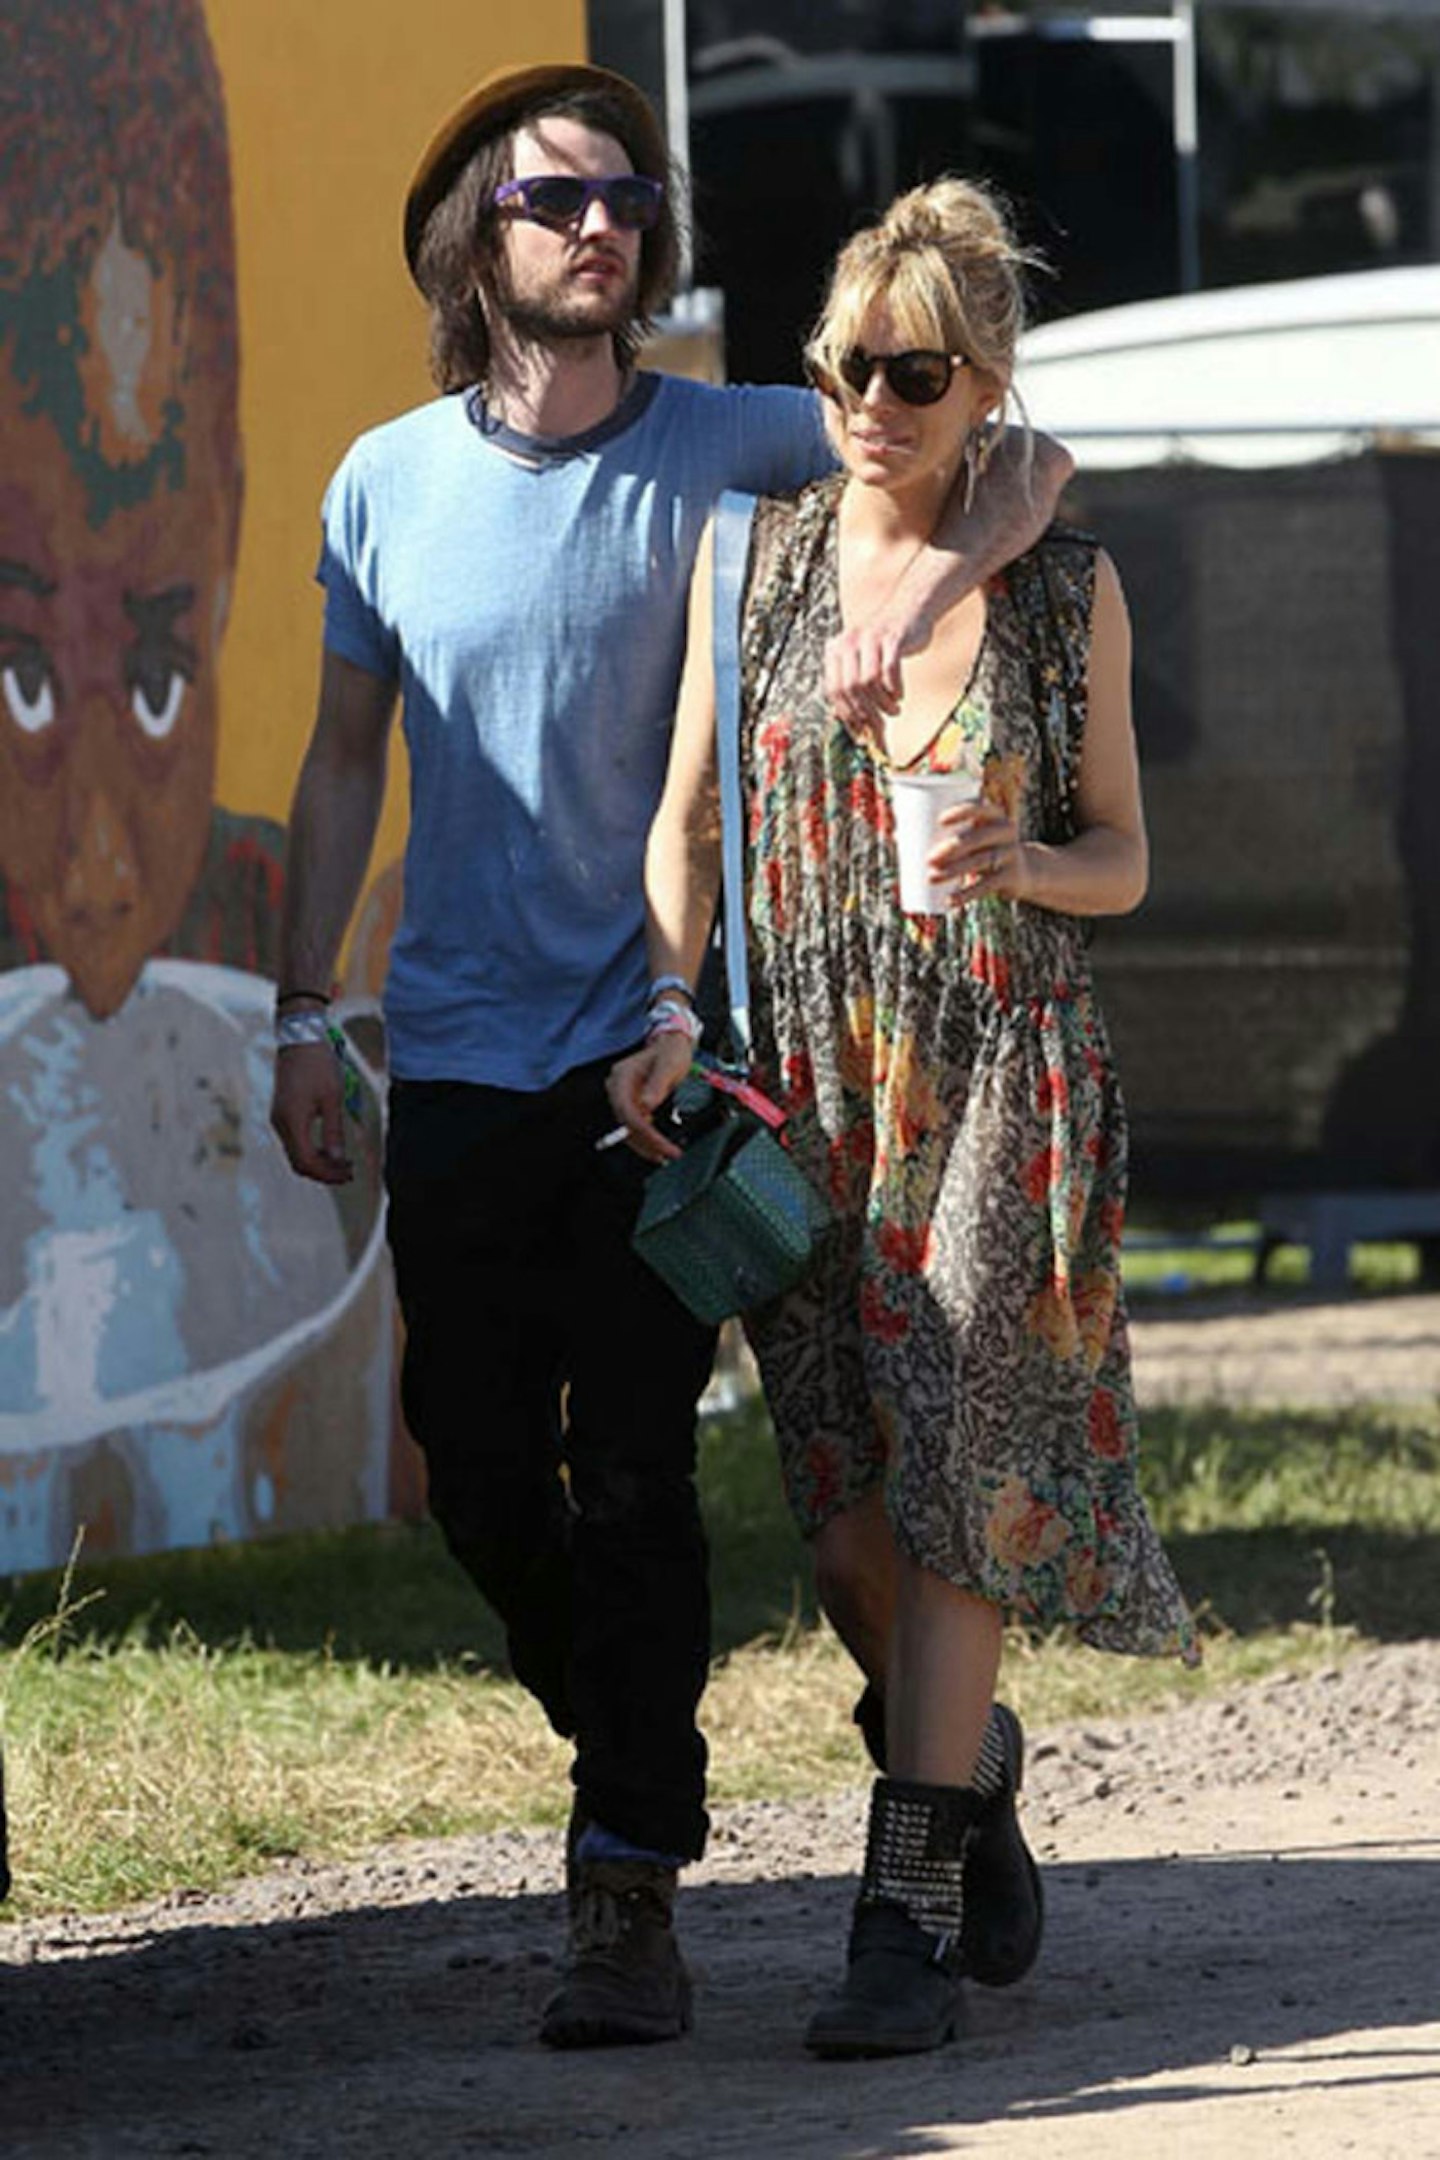 23-Sienna Miller in Topshop dress with a Anya Hindmarch Bathurst bag at Glastonbury - 29 June 2013